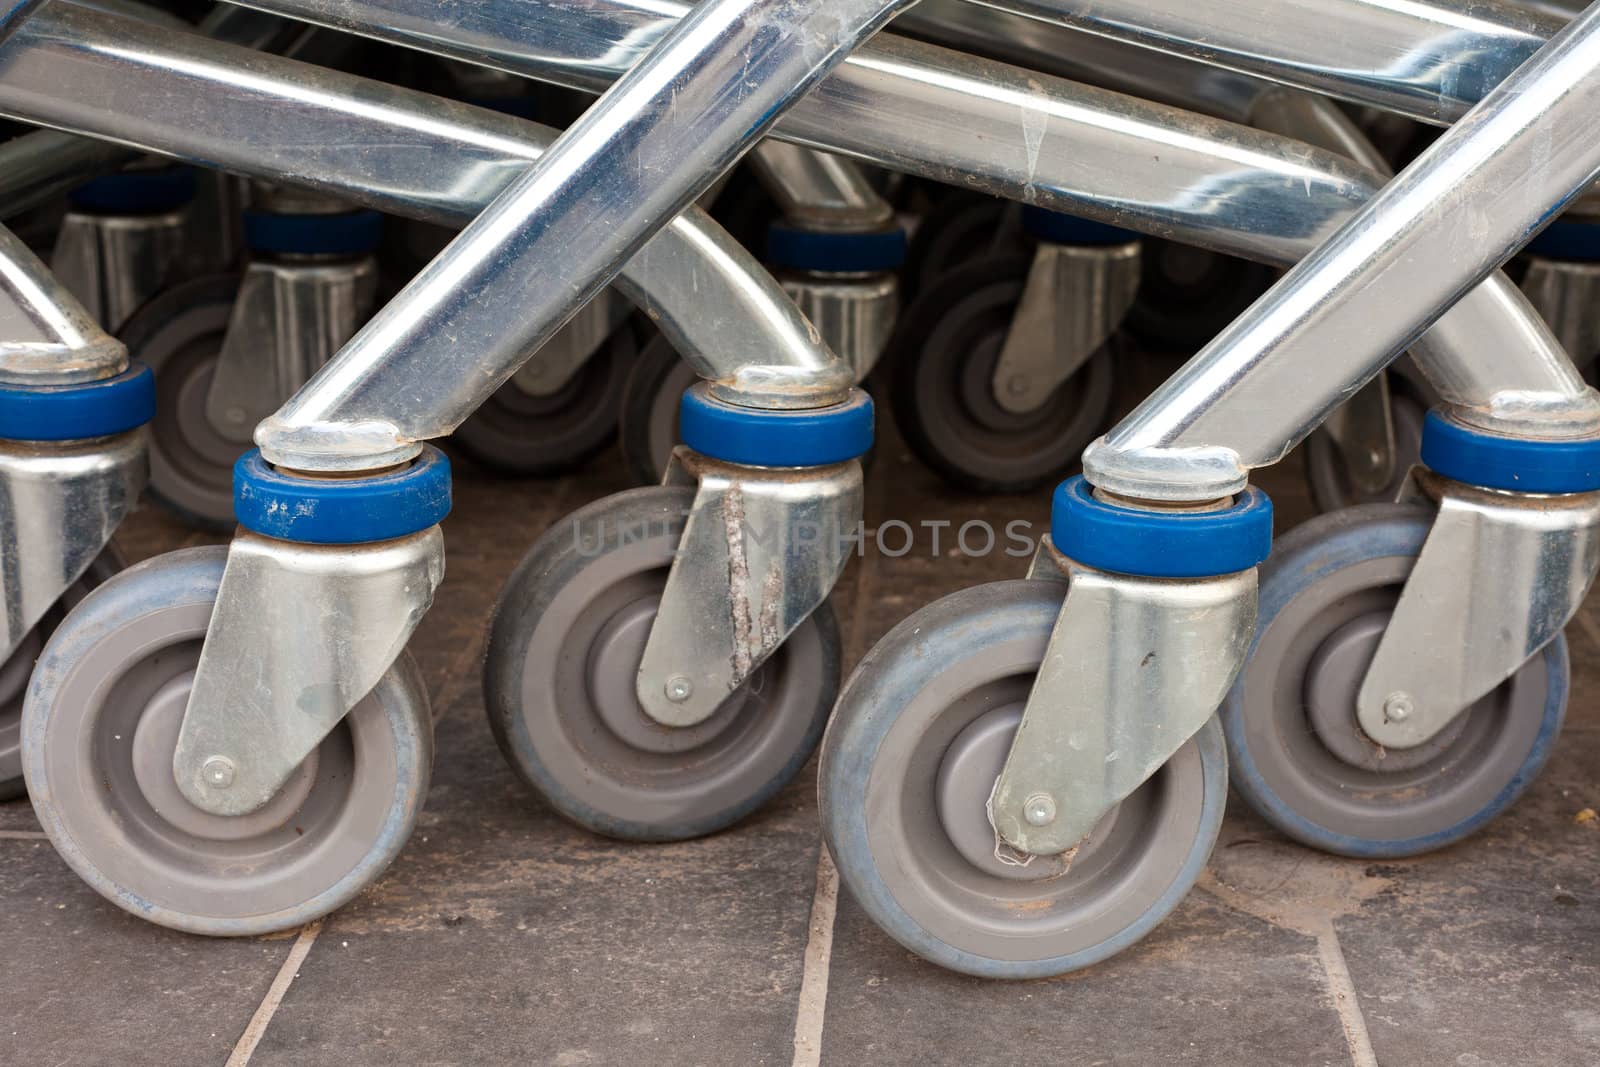 Wheels of Metal Shopping Carts by PiLens